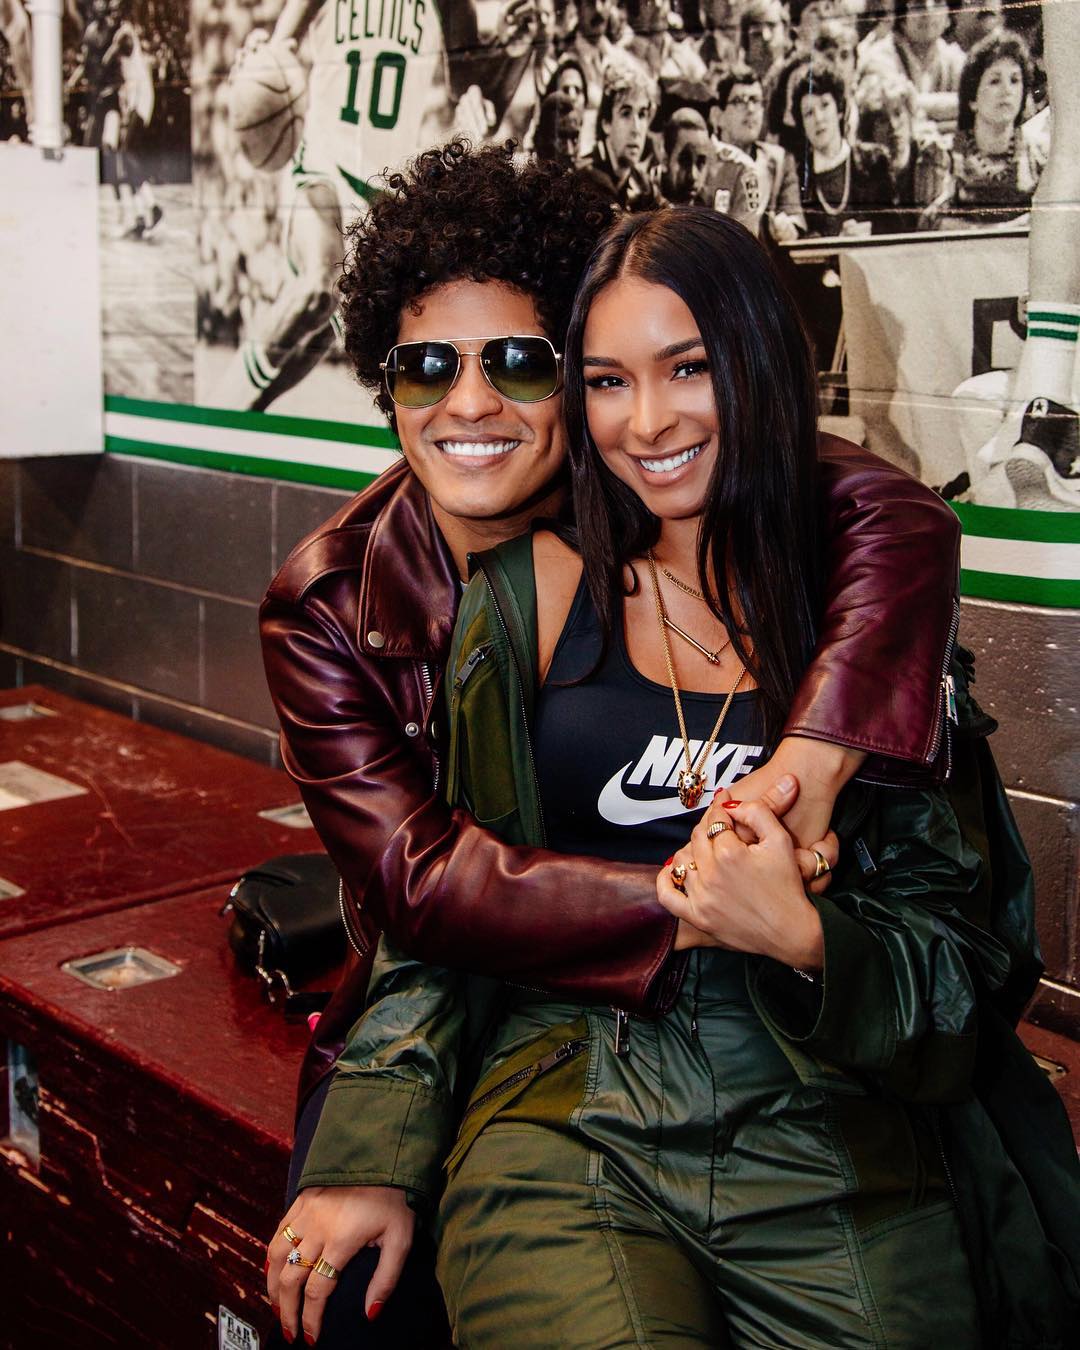 Bruno Mars with his girlfriend Jessica Caban